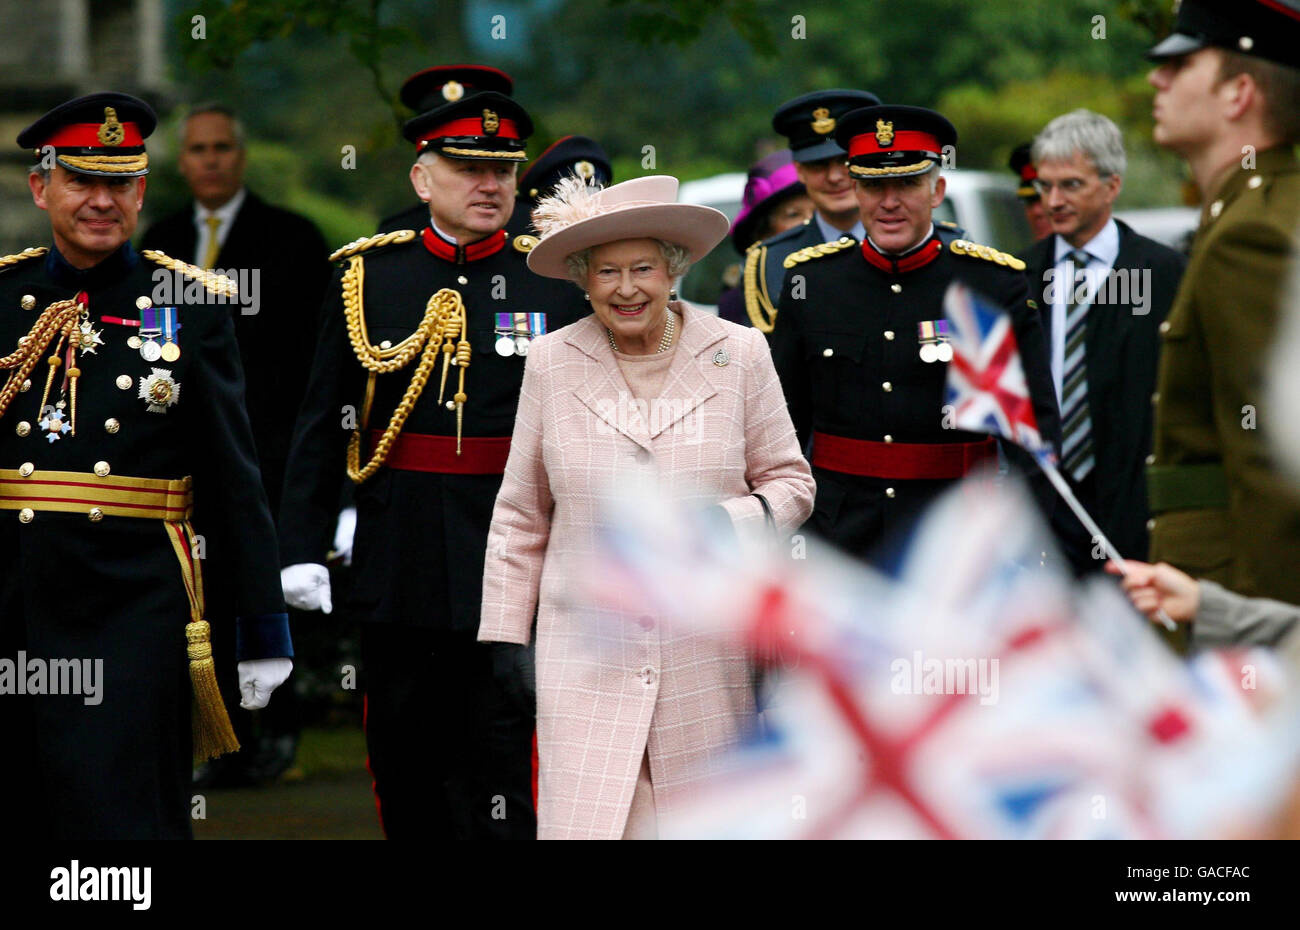 Britain's Queen Elizabeth II arrives for a visit to the Corps of Royal Engineers at Brompton Barracks, Chatham, Kent. Stock Photo